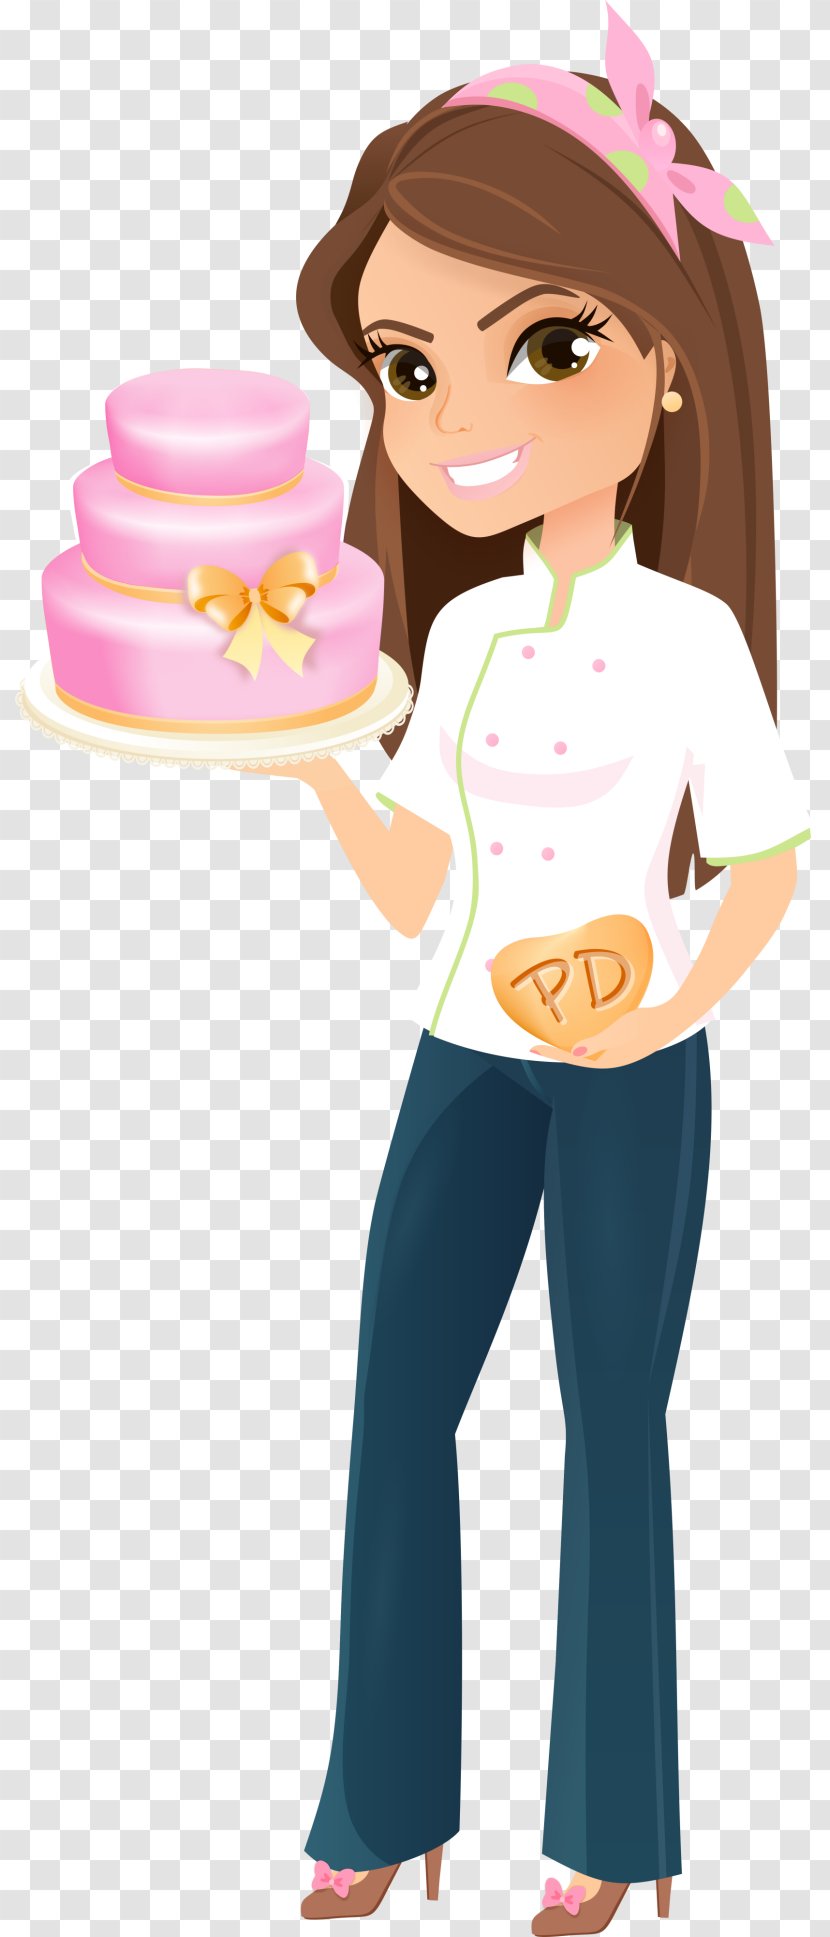 Birthday Cake Confectionery Store Mascot - Silhouette Transparent PNG